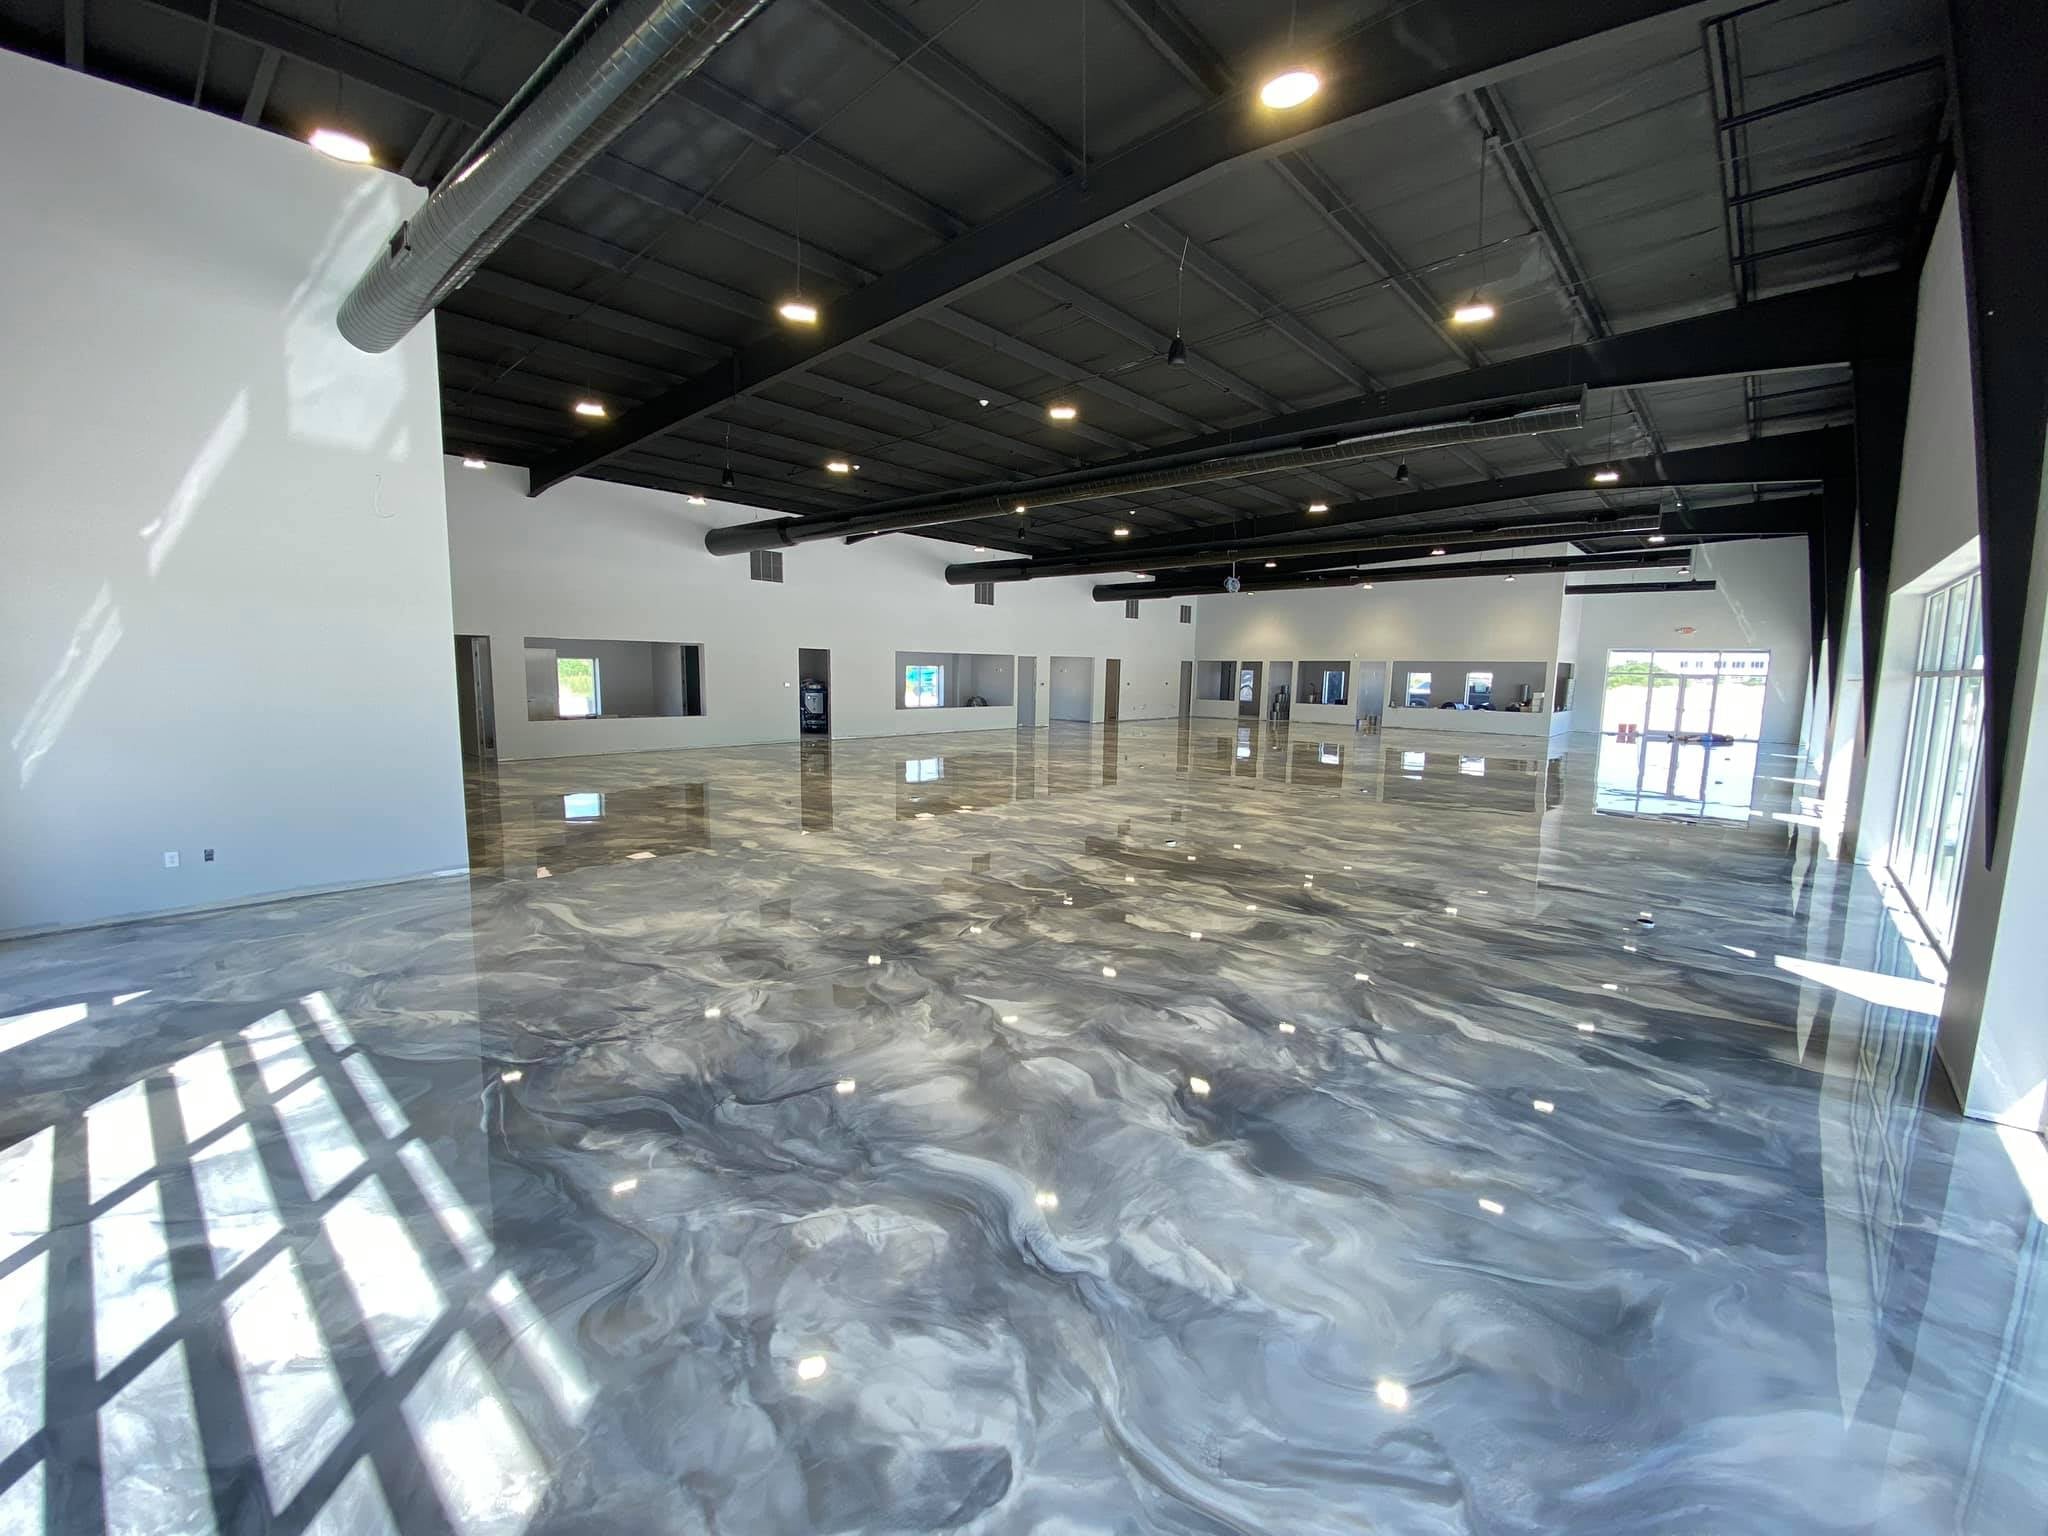 7 Things to Consider Before Applying an Epoxy Floor Coating - Xtreme Polishing Systems